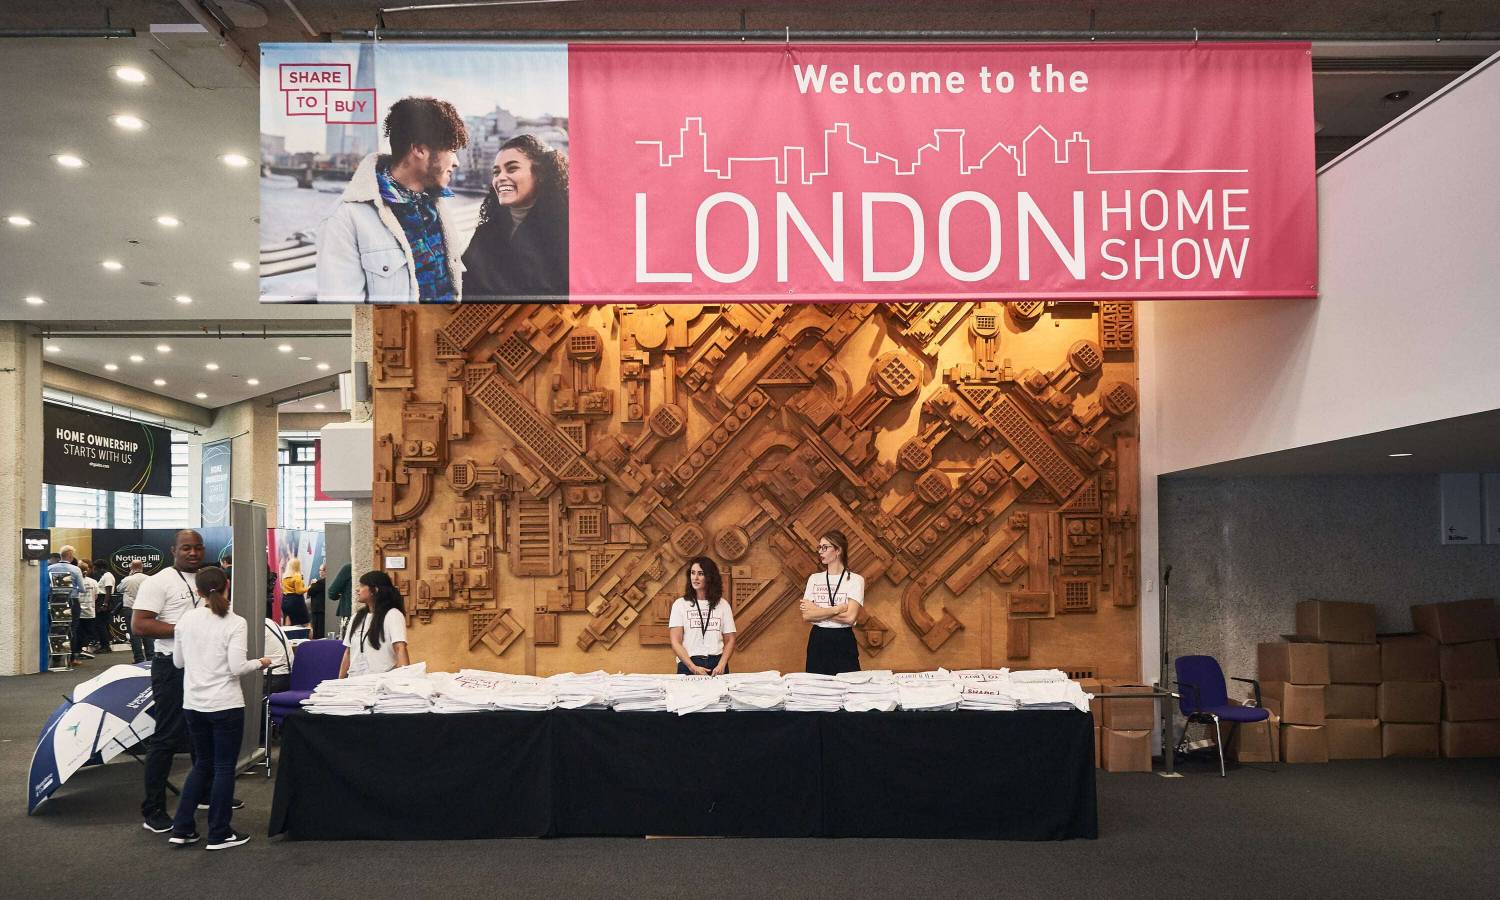 London Home Show Returns To London In September 2022